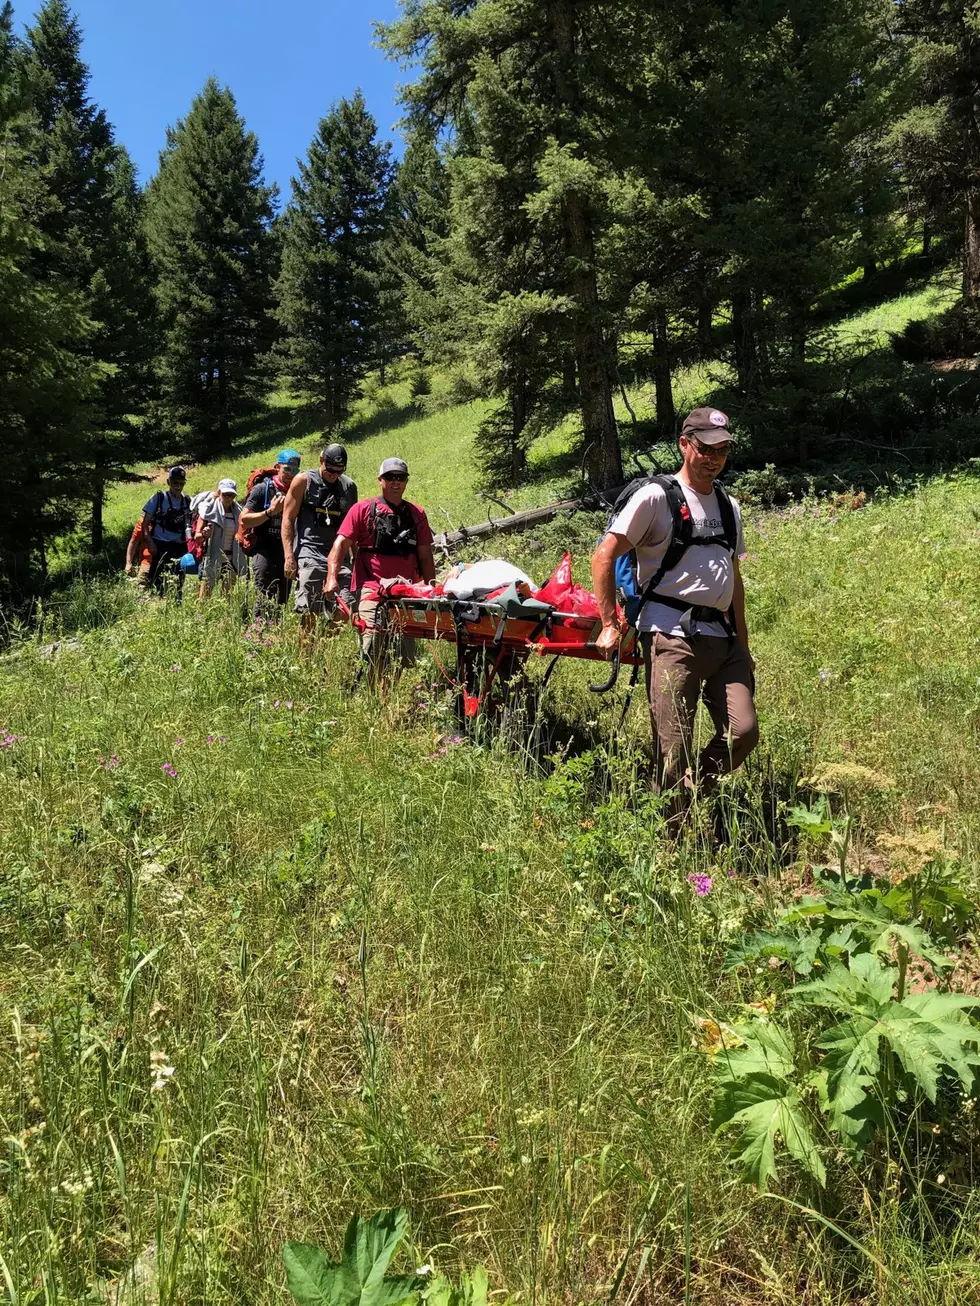 Dislocated Hip Prompts Search and Rescue South of Big Sky